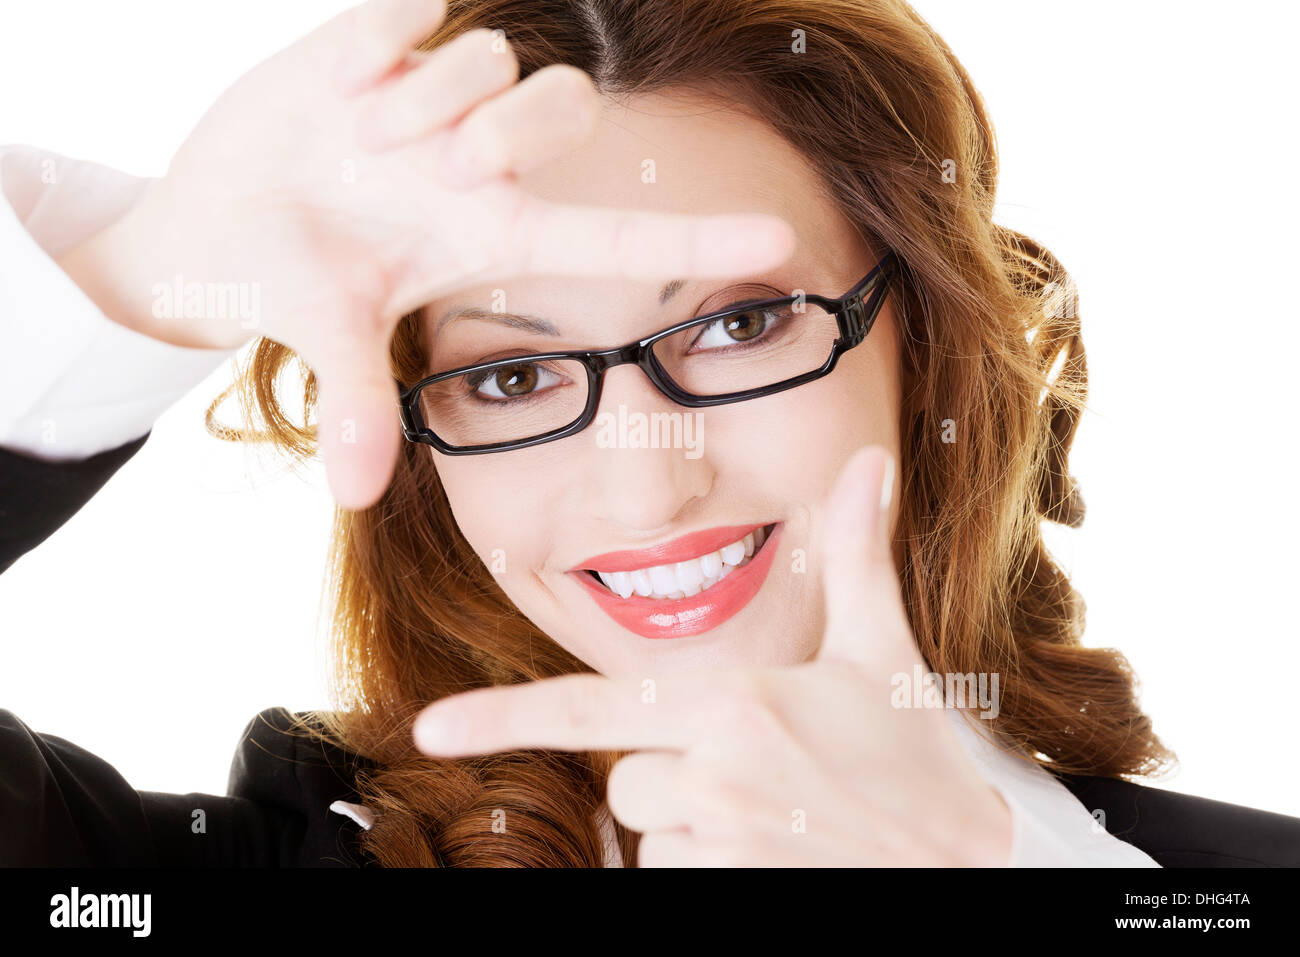 Snapshot of business woman in eyeglasses. Isolated on white.  Stock Photo